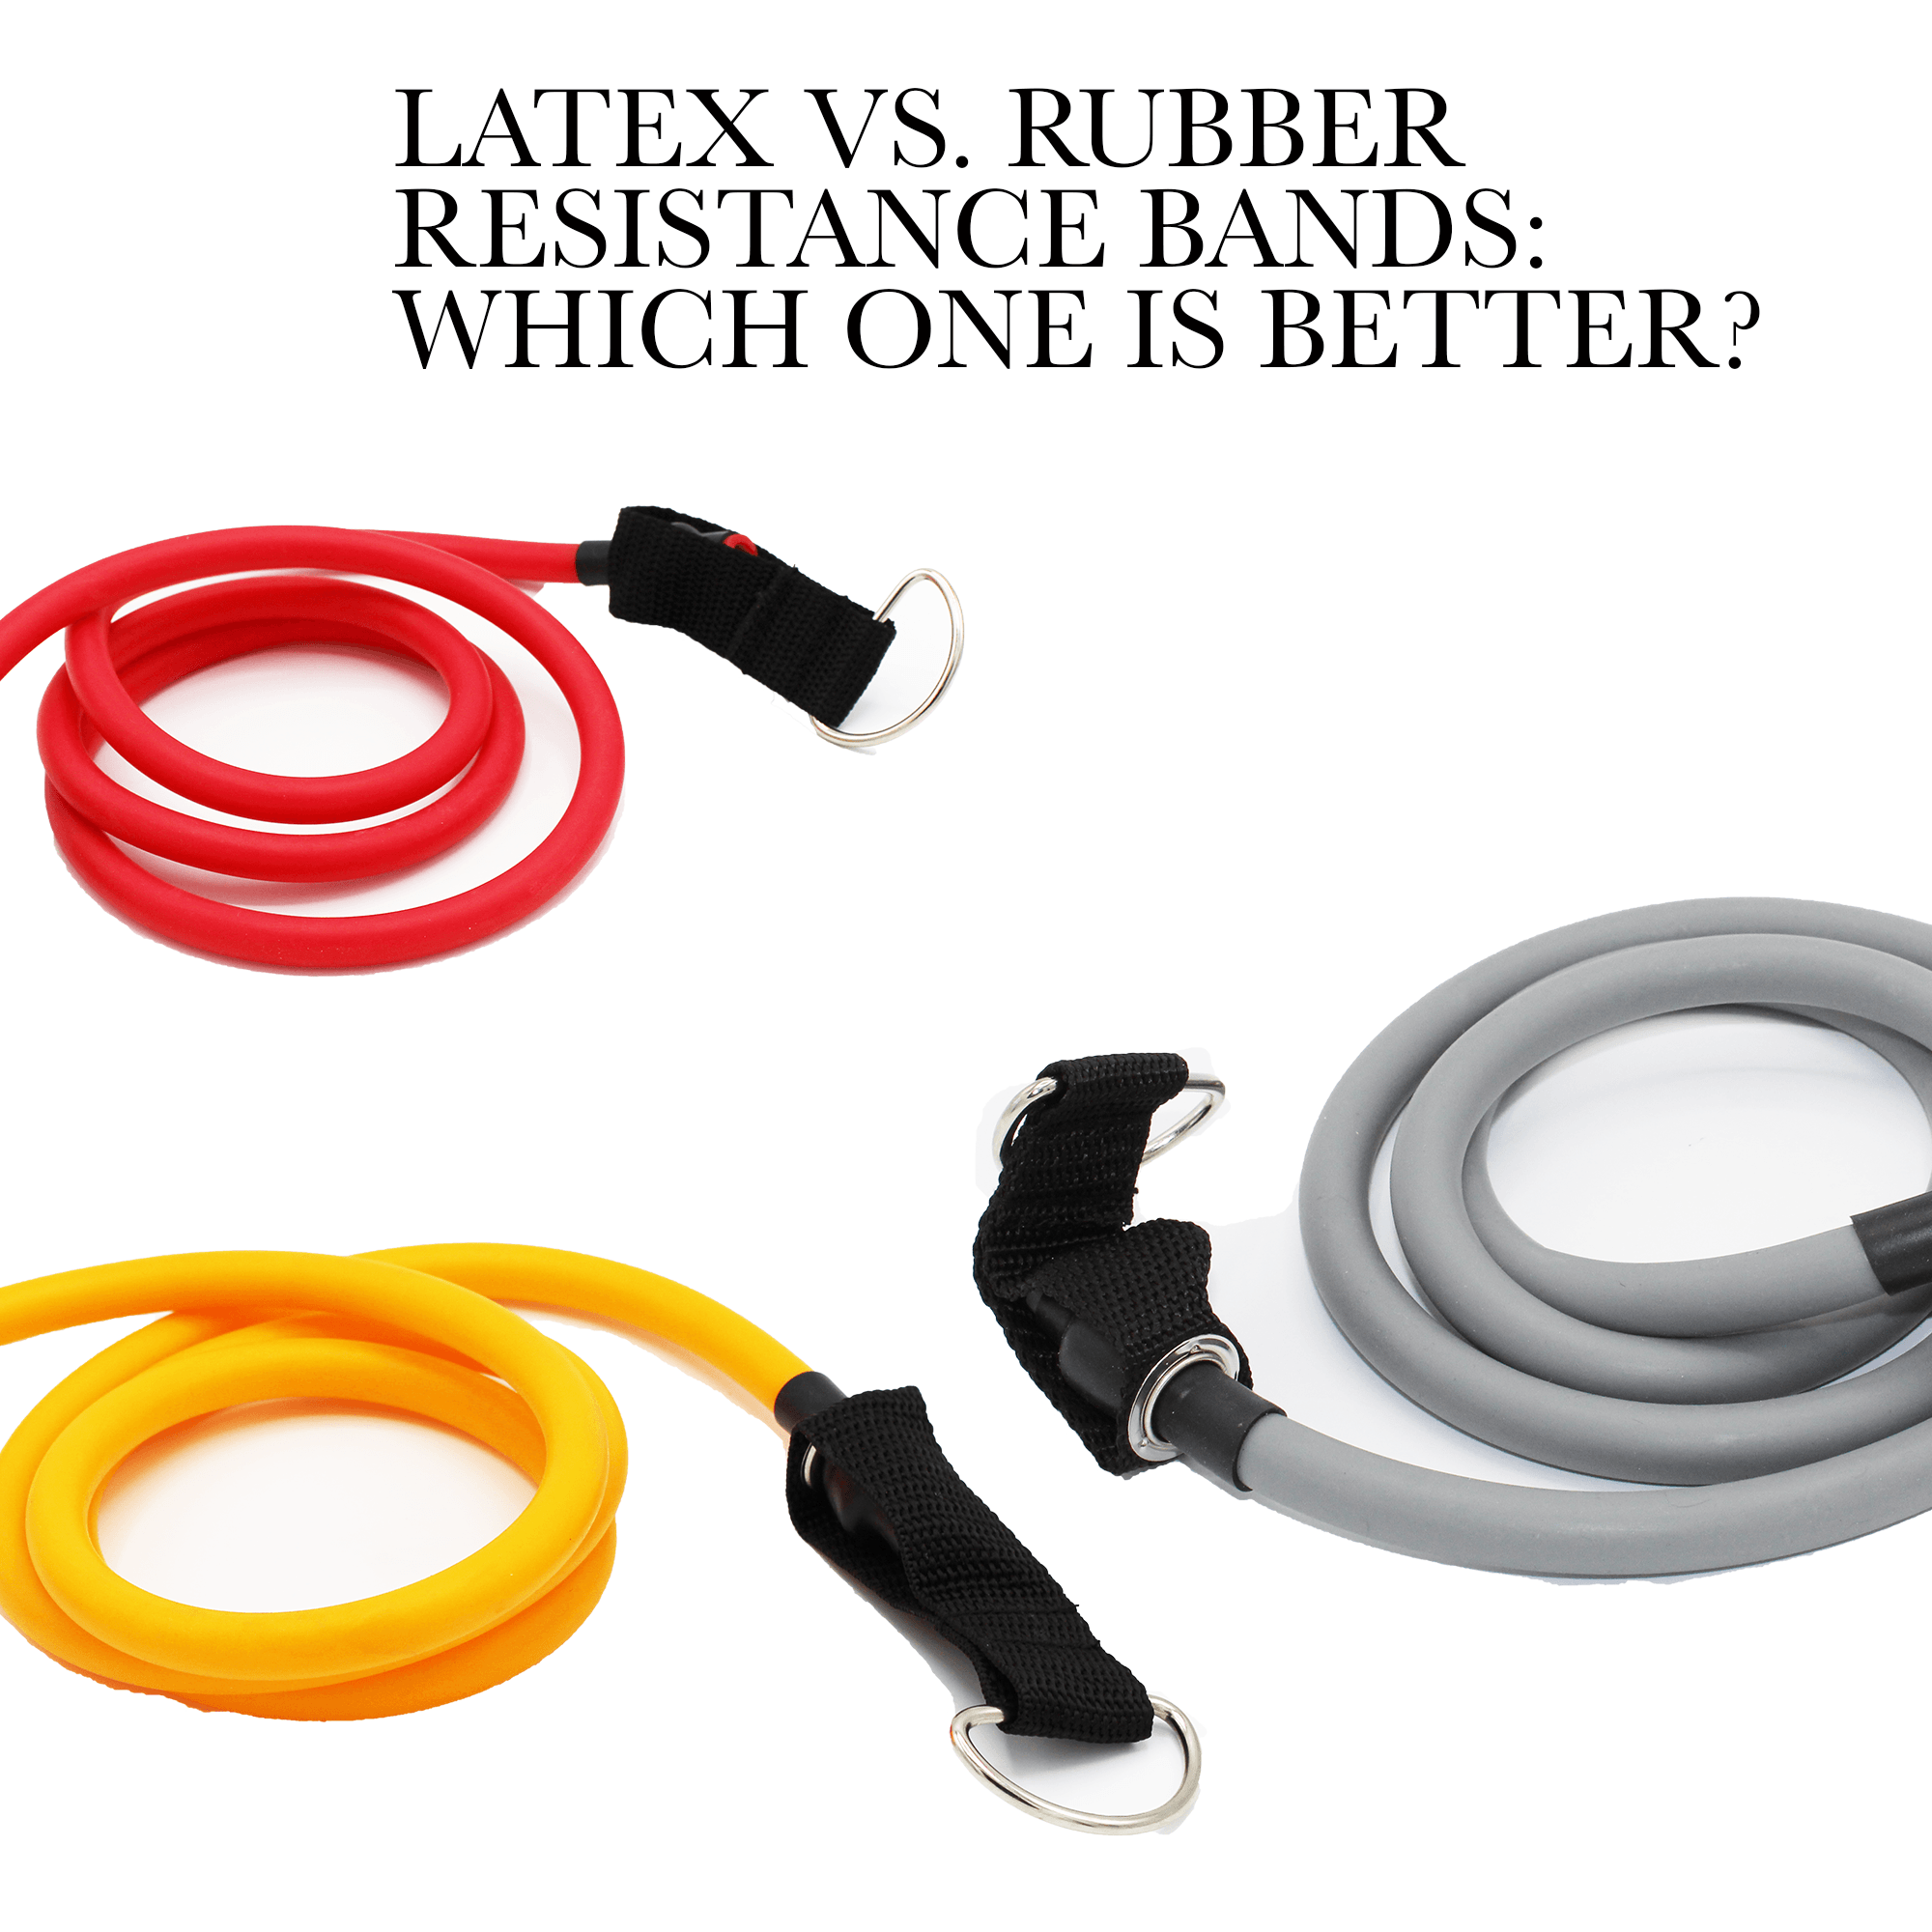 Latex vs. Rubber Resistance Bands: Which one is better? – Fitness Health